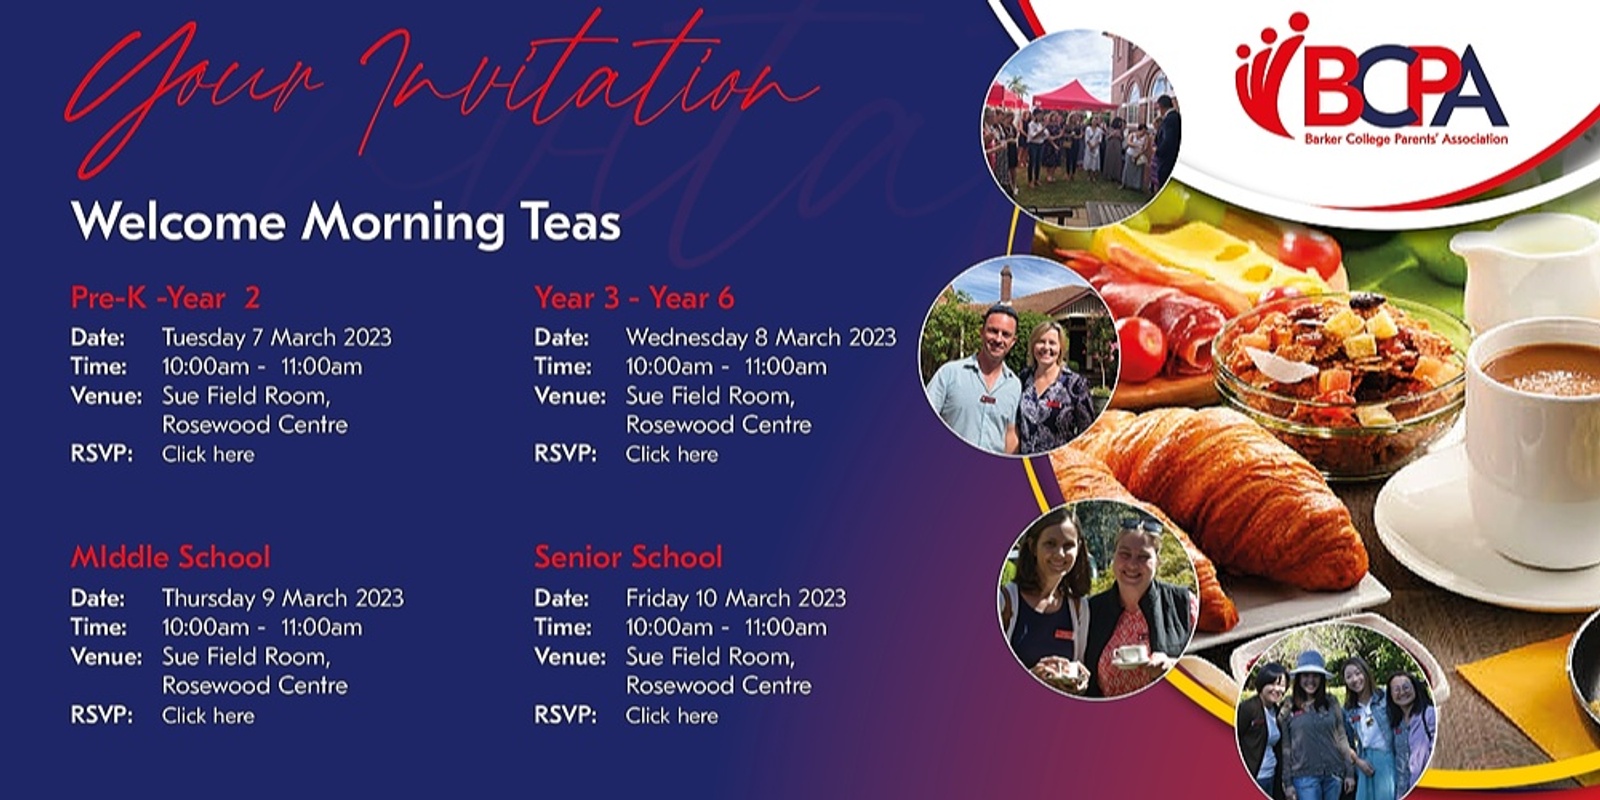 Banner image for Welcome Morning Tea - Parents of Senior School (Year 10 to 12) students